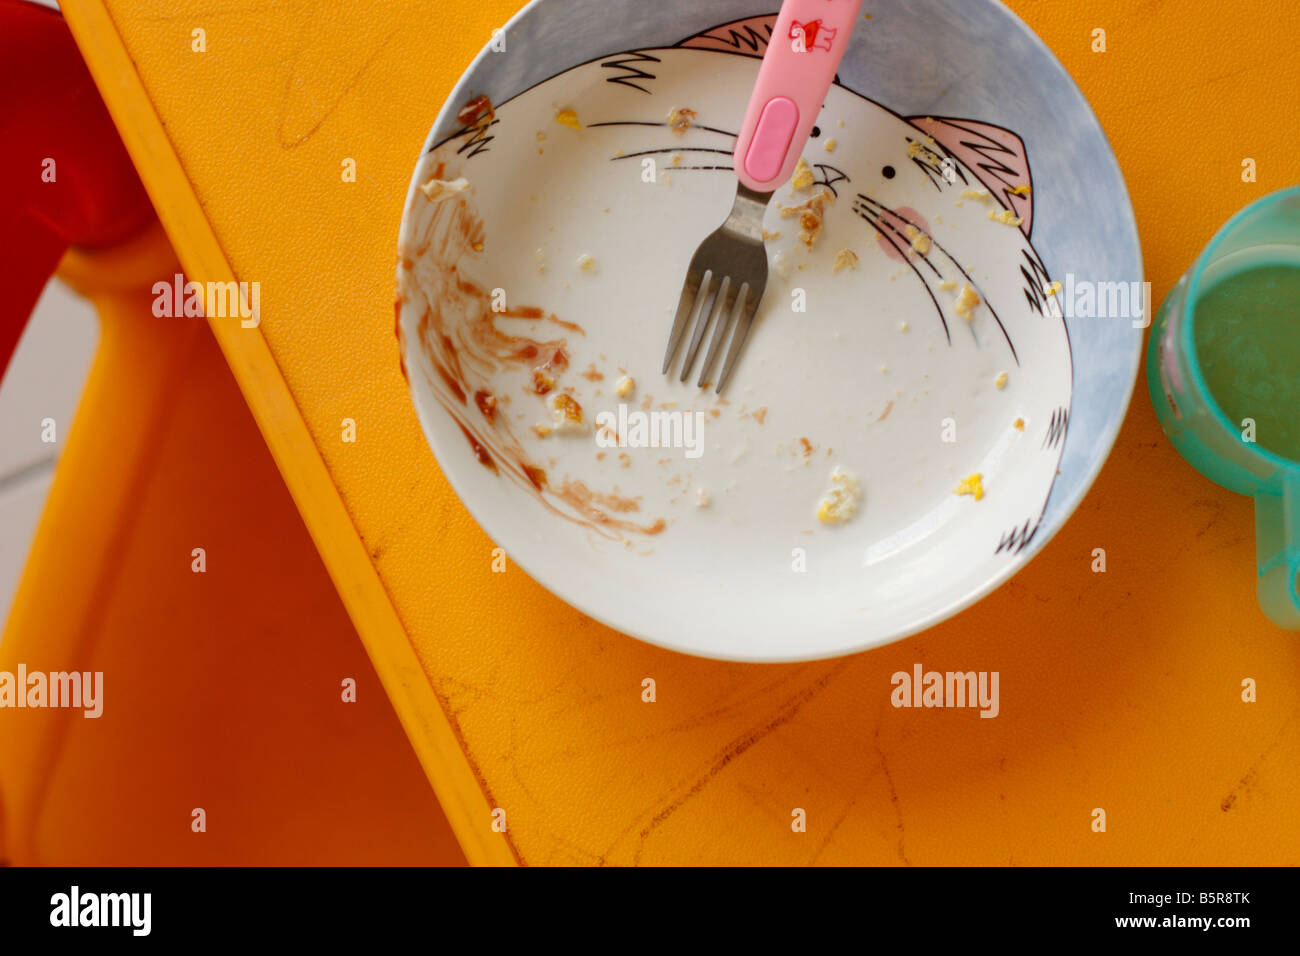 Dirty plate on a child's table. Stock Photo